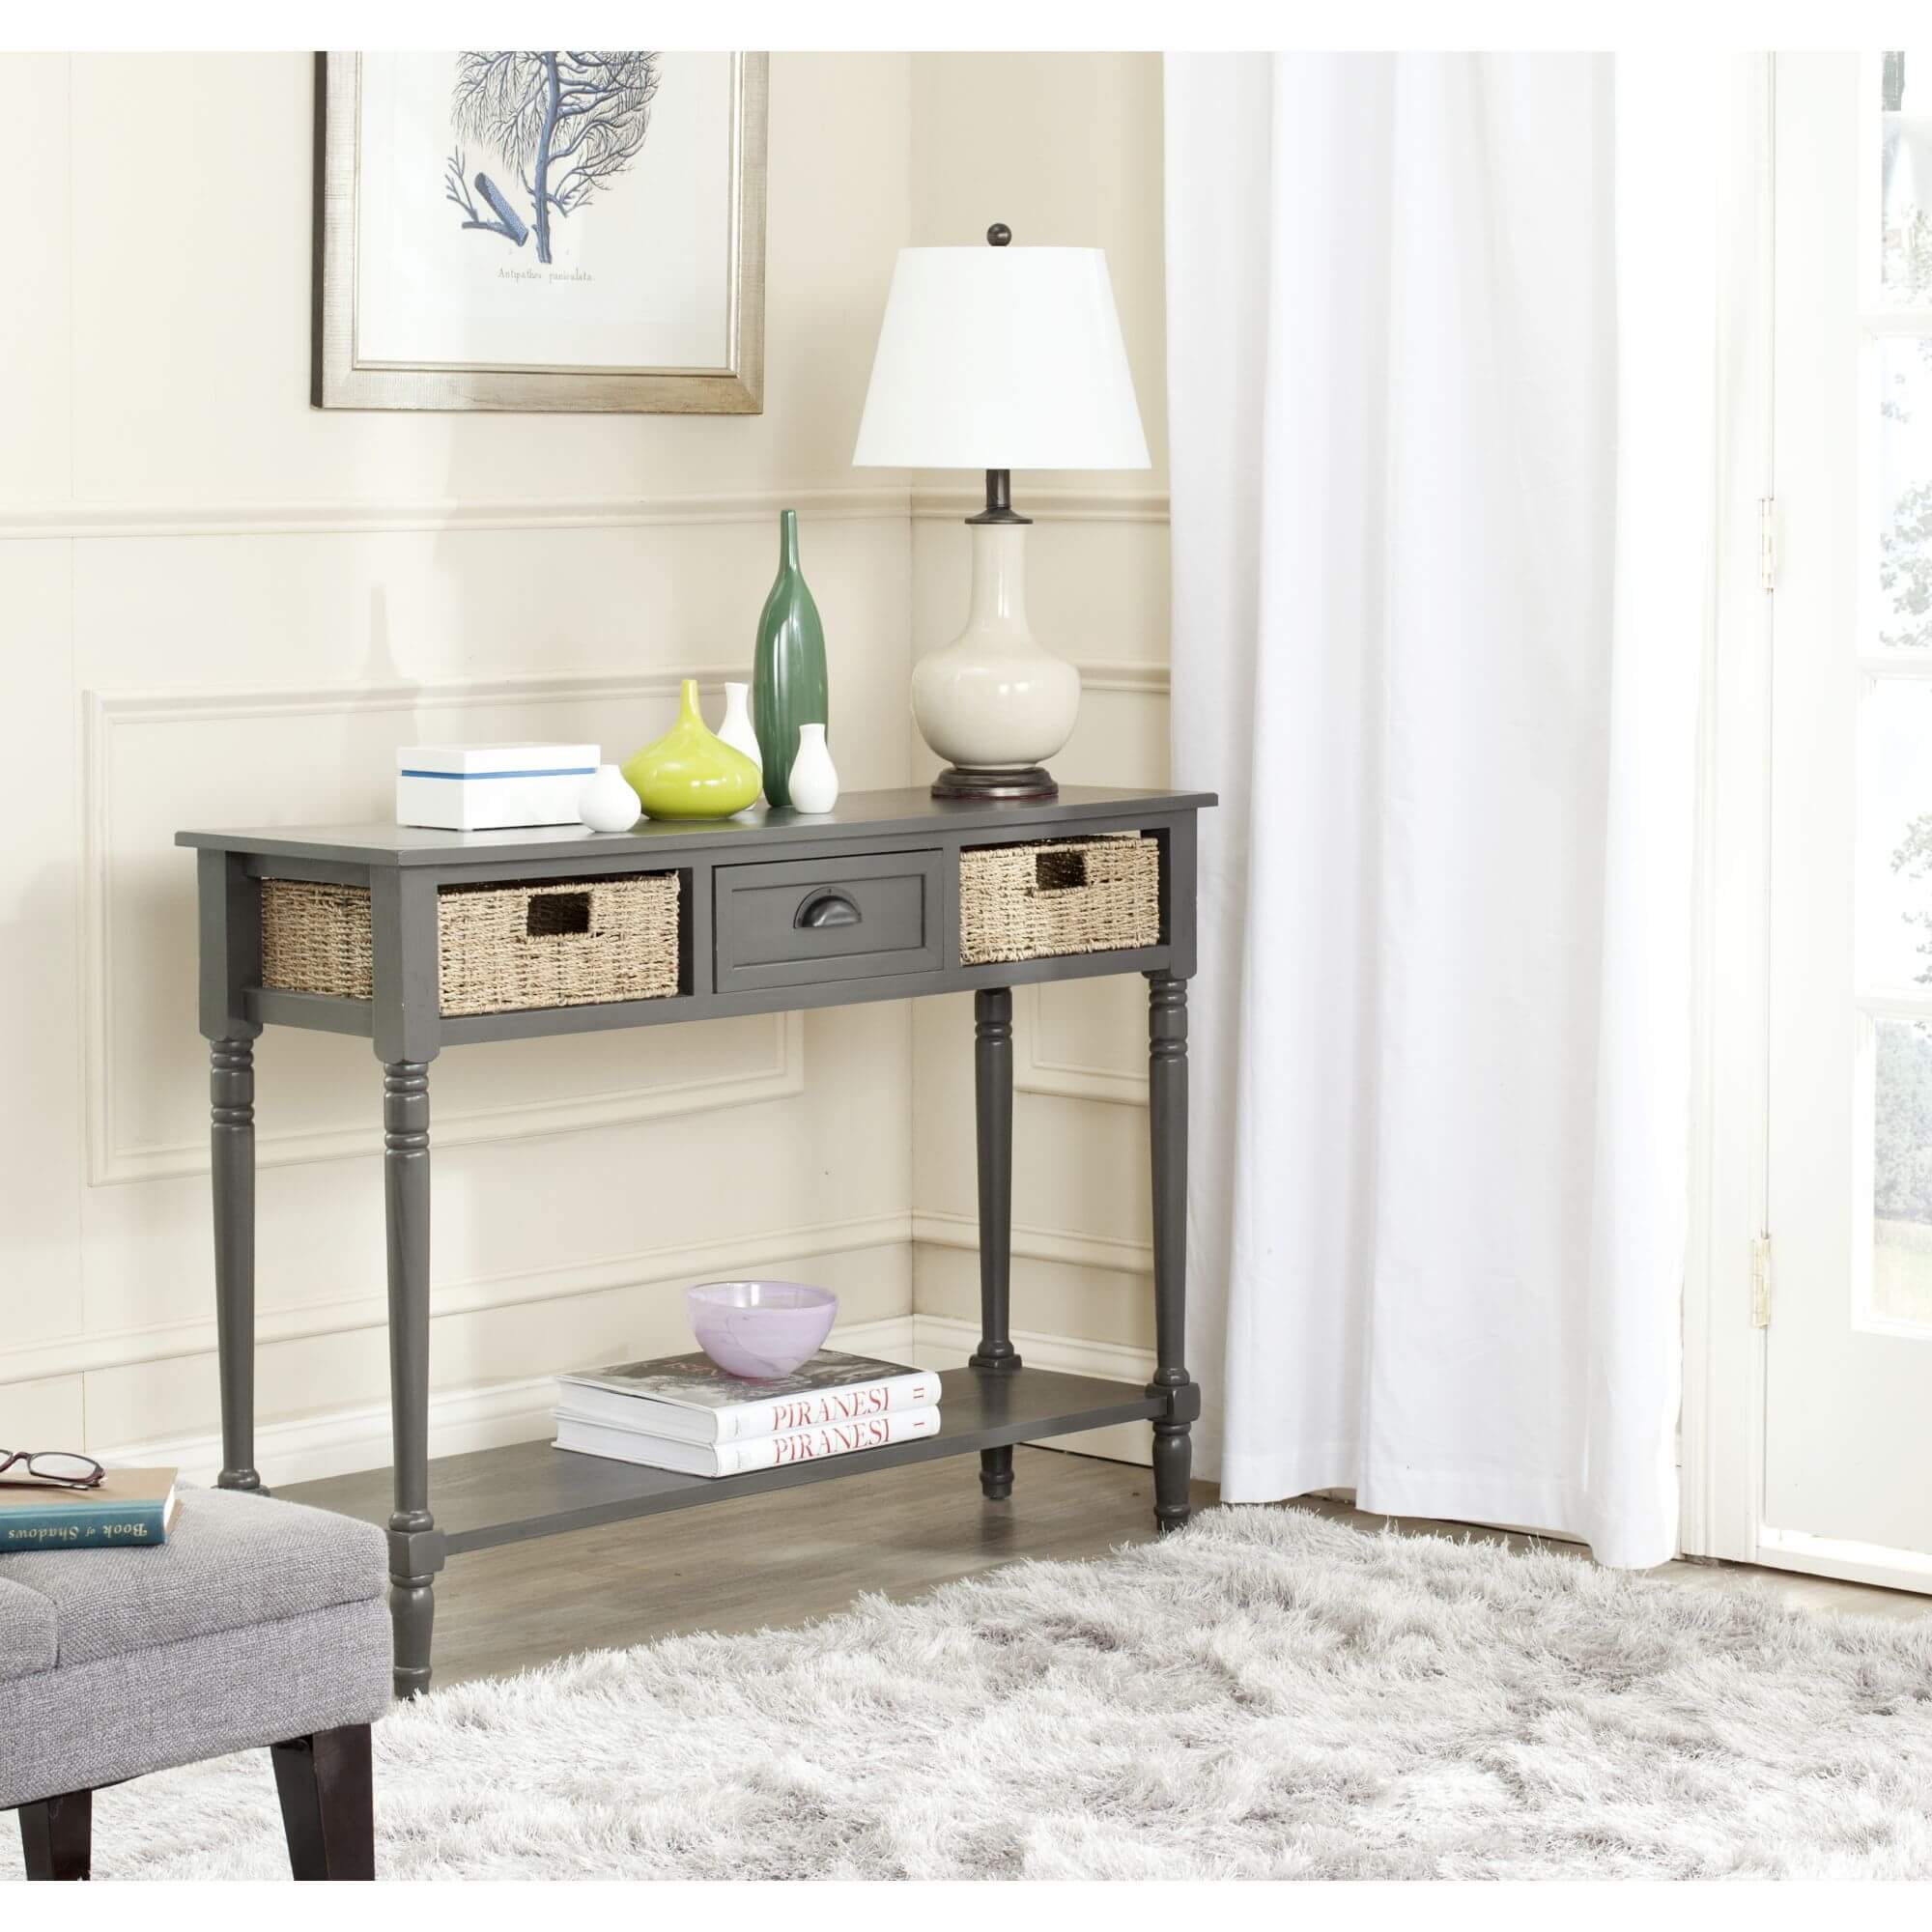 Carina Wicker Console Table With Storage - Grey